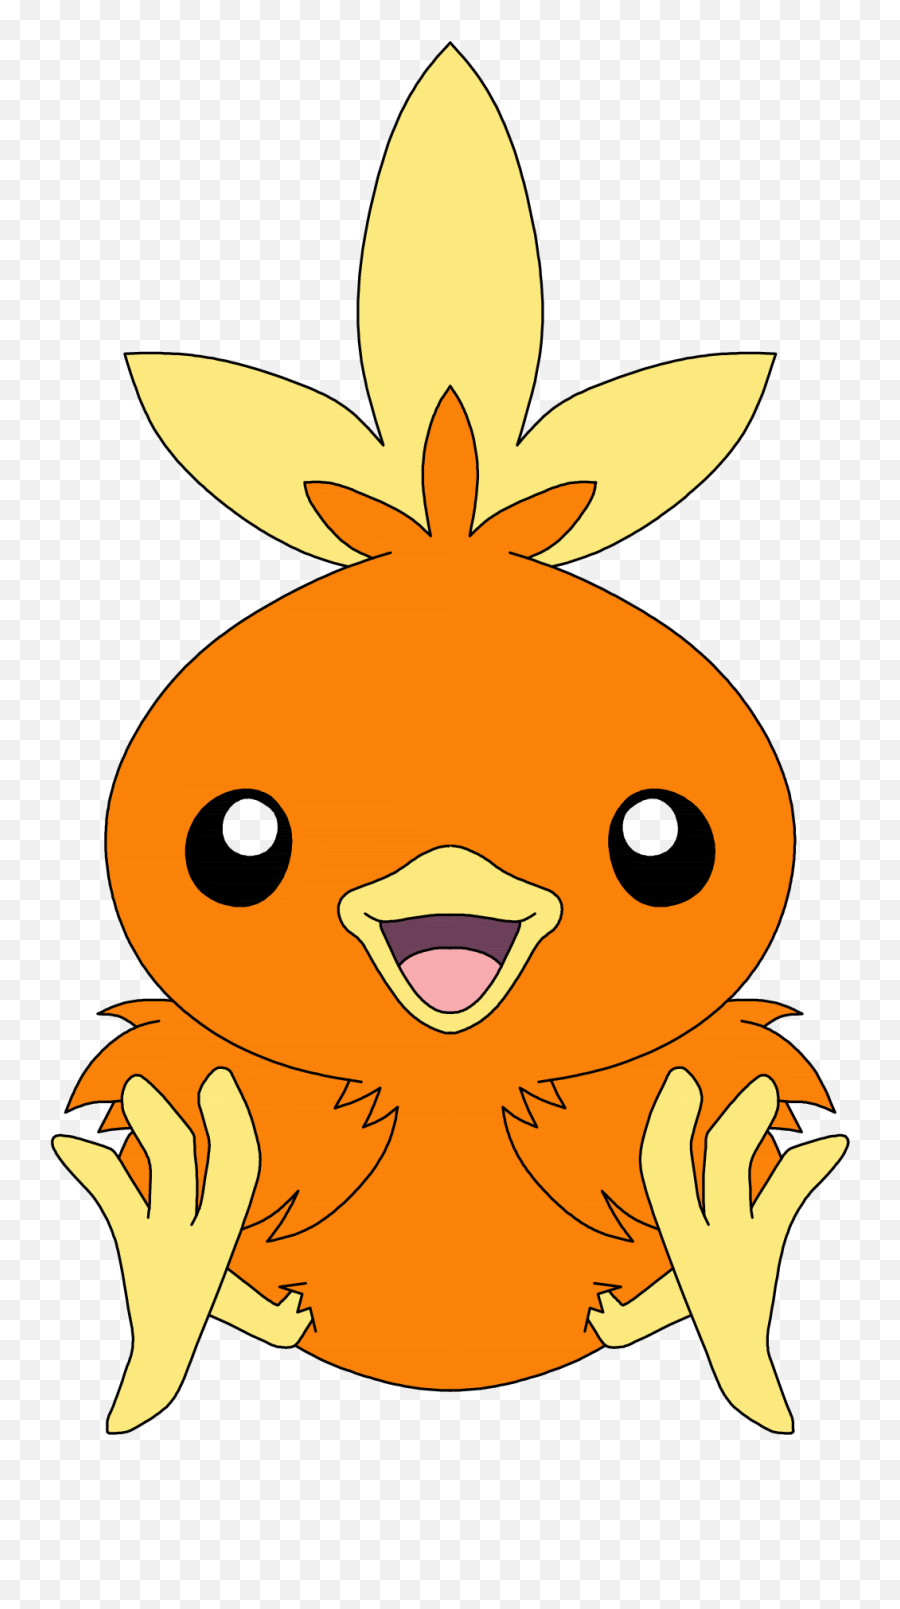 How To Draw Pokémon Torchic In 10 Steps - Easy Pokemon Drawing With Colour Png,Torchic Png